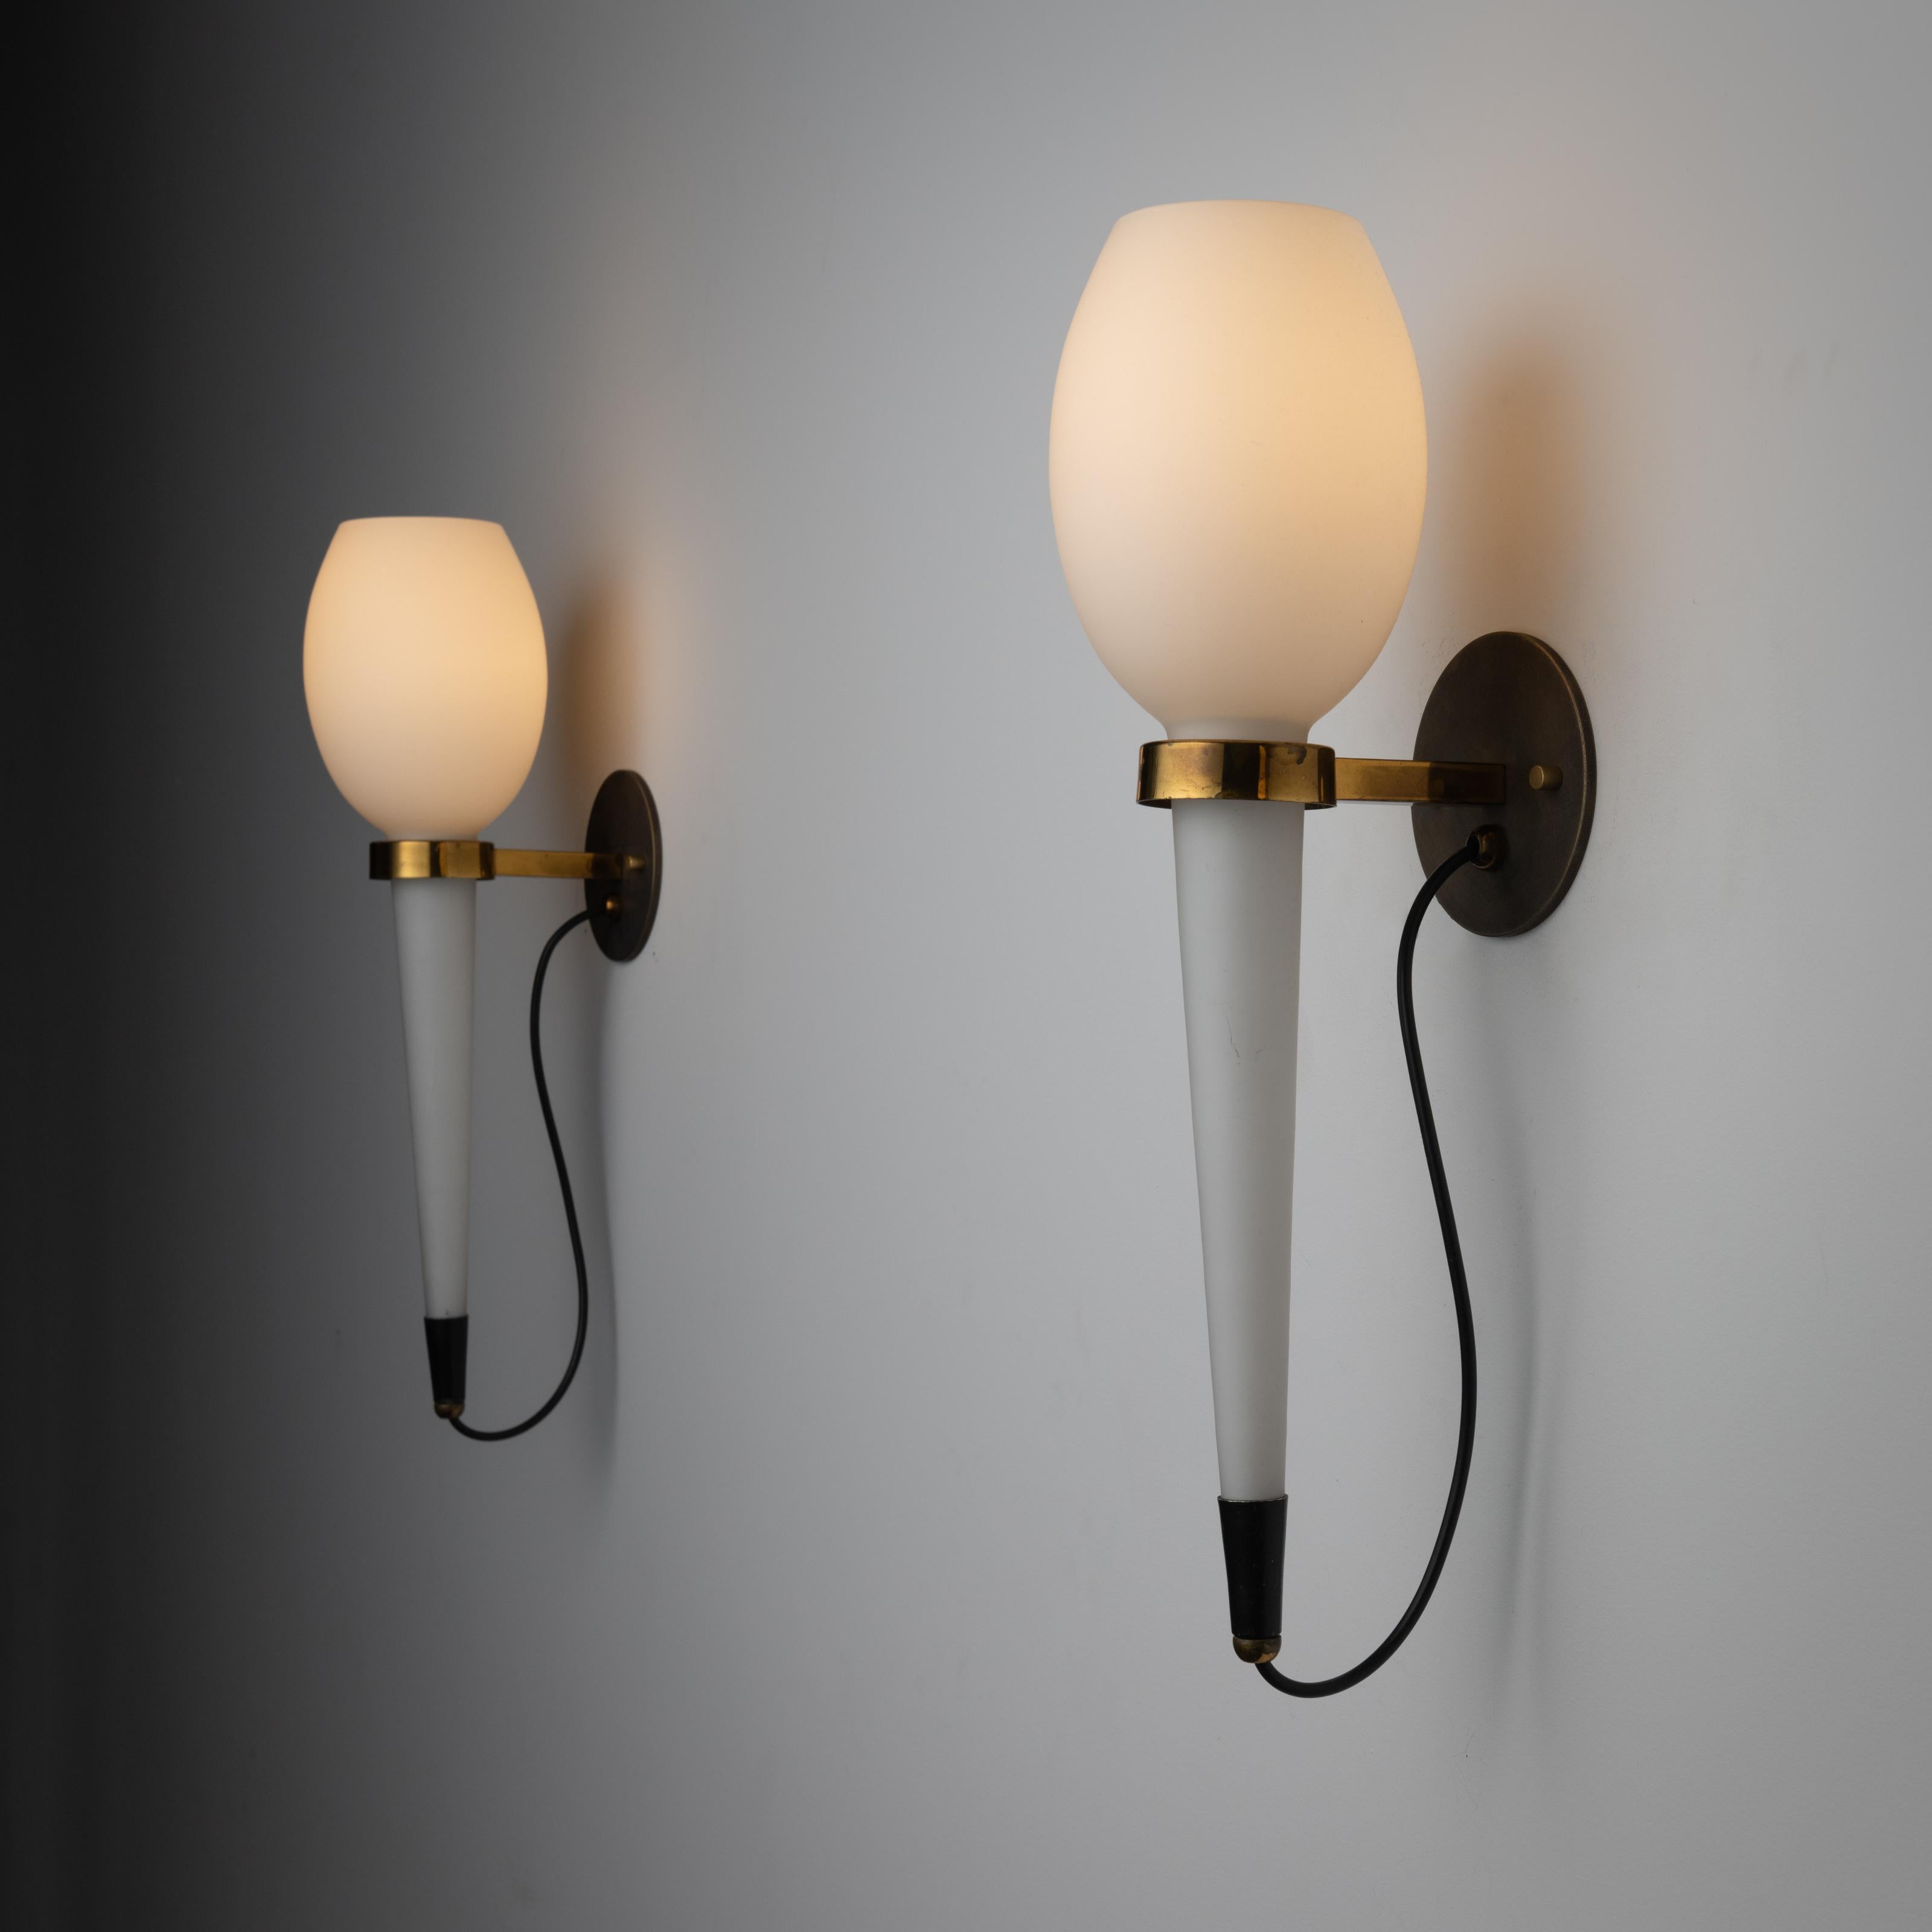 Sconces by Stilnovo. Designed and manufactured in Italy, circa 1960. Beautiful milk glass tulip sconces with a polished brass clasp that adheres to the backplate. Each sconce holds one E27 bulb, adapted for the US. We recommend using 40w maximum E27